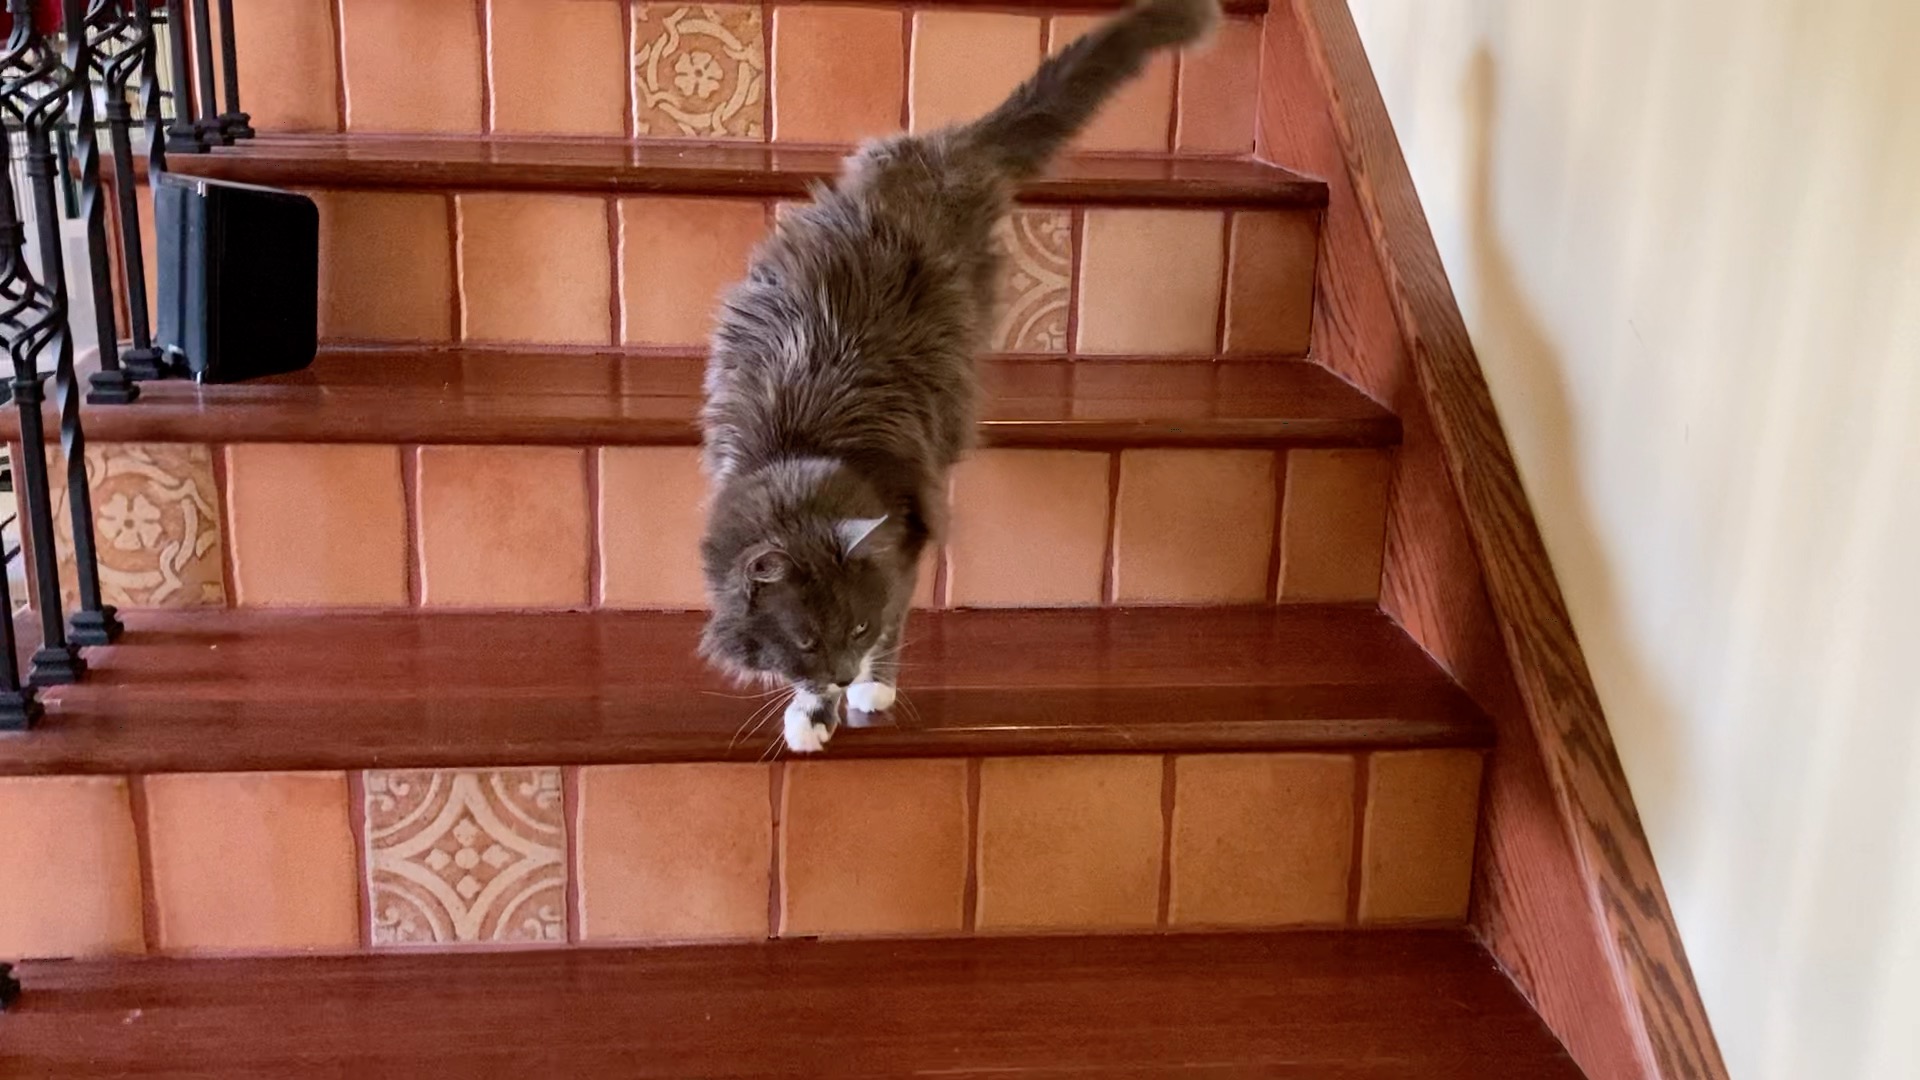 OLder cat coming dowm stairs